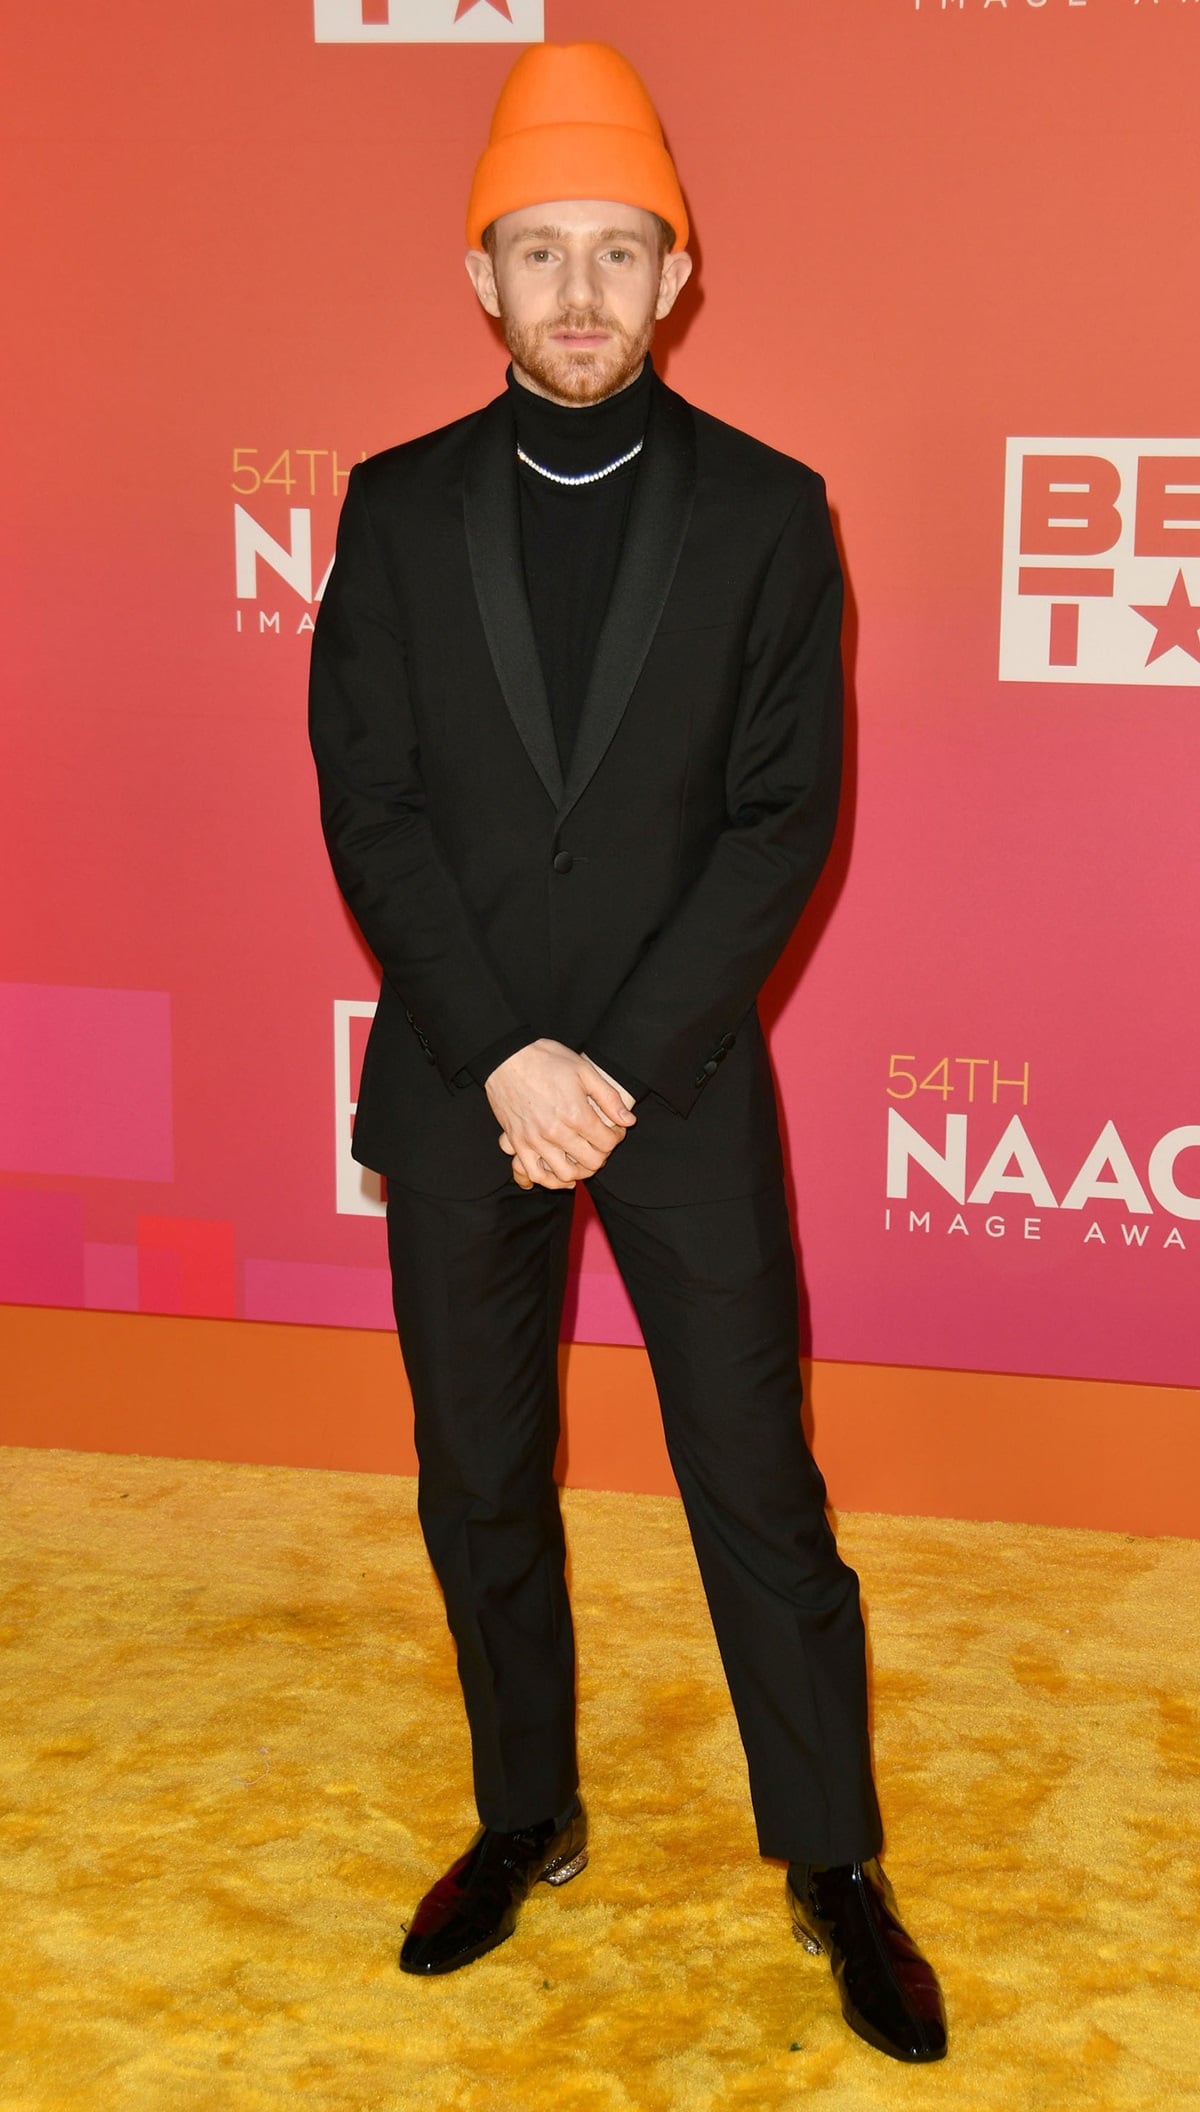 Chris Perfetti in a Richard James suit paired with a Paul Smith turtleneck and Christian Louboutin shoes at the 54th NAACP Image Awards